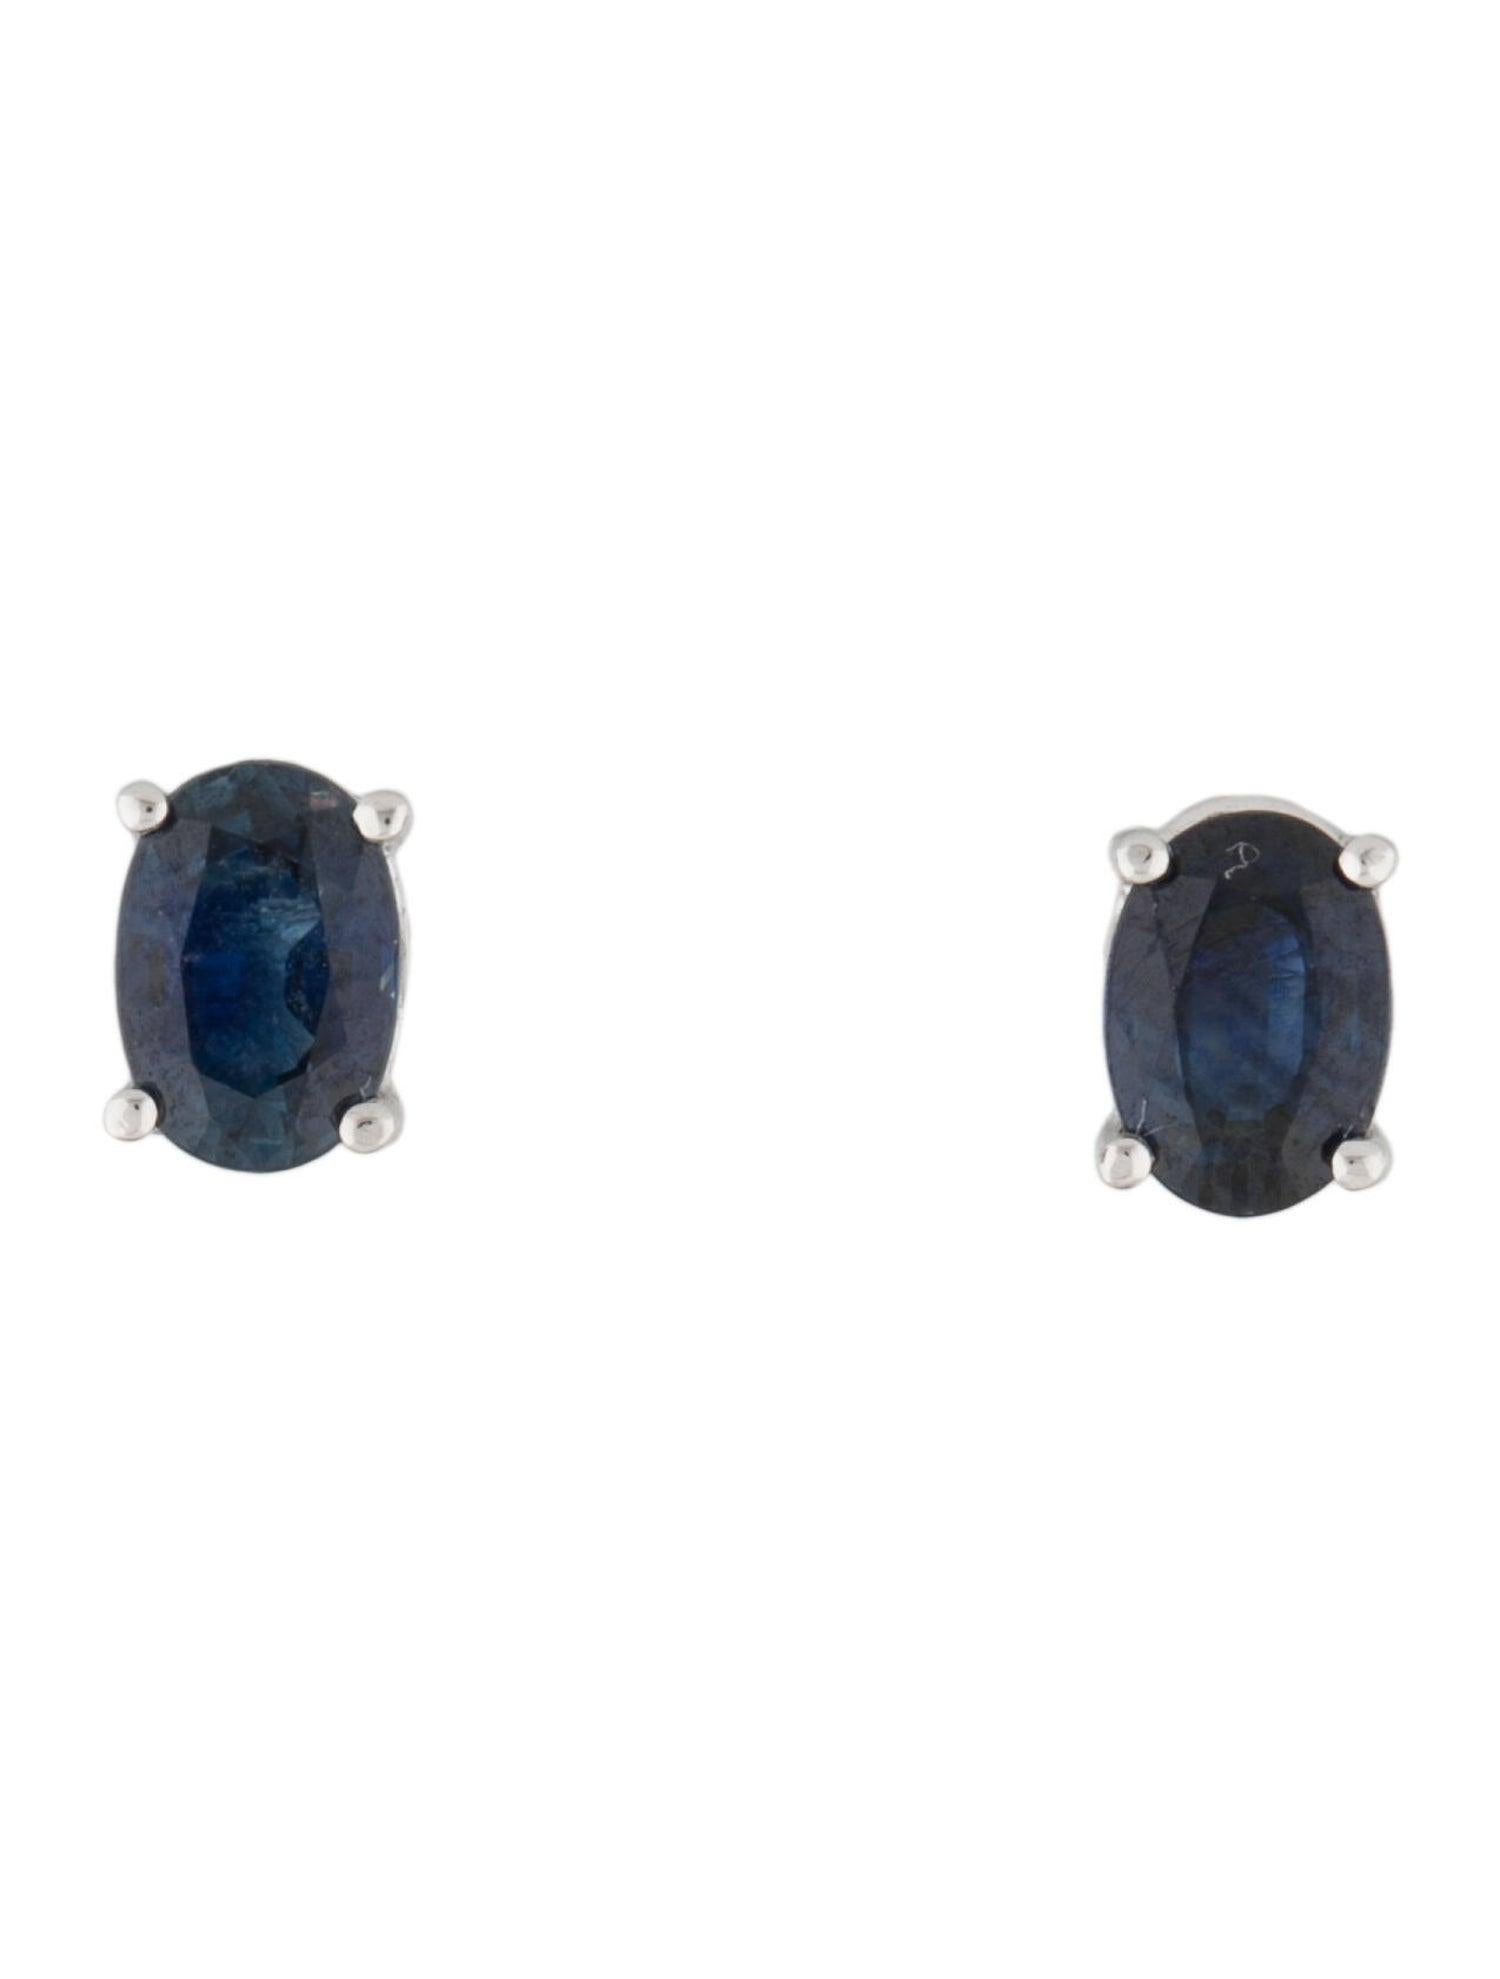 Quality Sapphire Earrings: Made from real Sapphire and elegant white gold casing design; 14K White Gold earrings feature 2 Oval Shape 6x4 Sapphire's weighing 1.30 carats. Butterfly Push Back closure 
Surprise Your Loved One with Our Sapphire